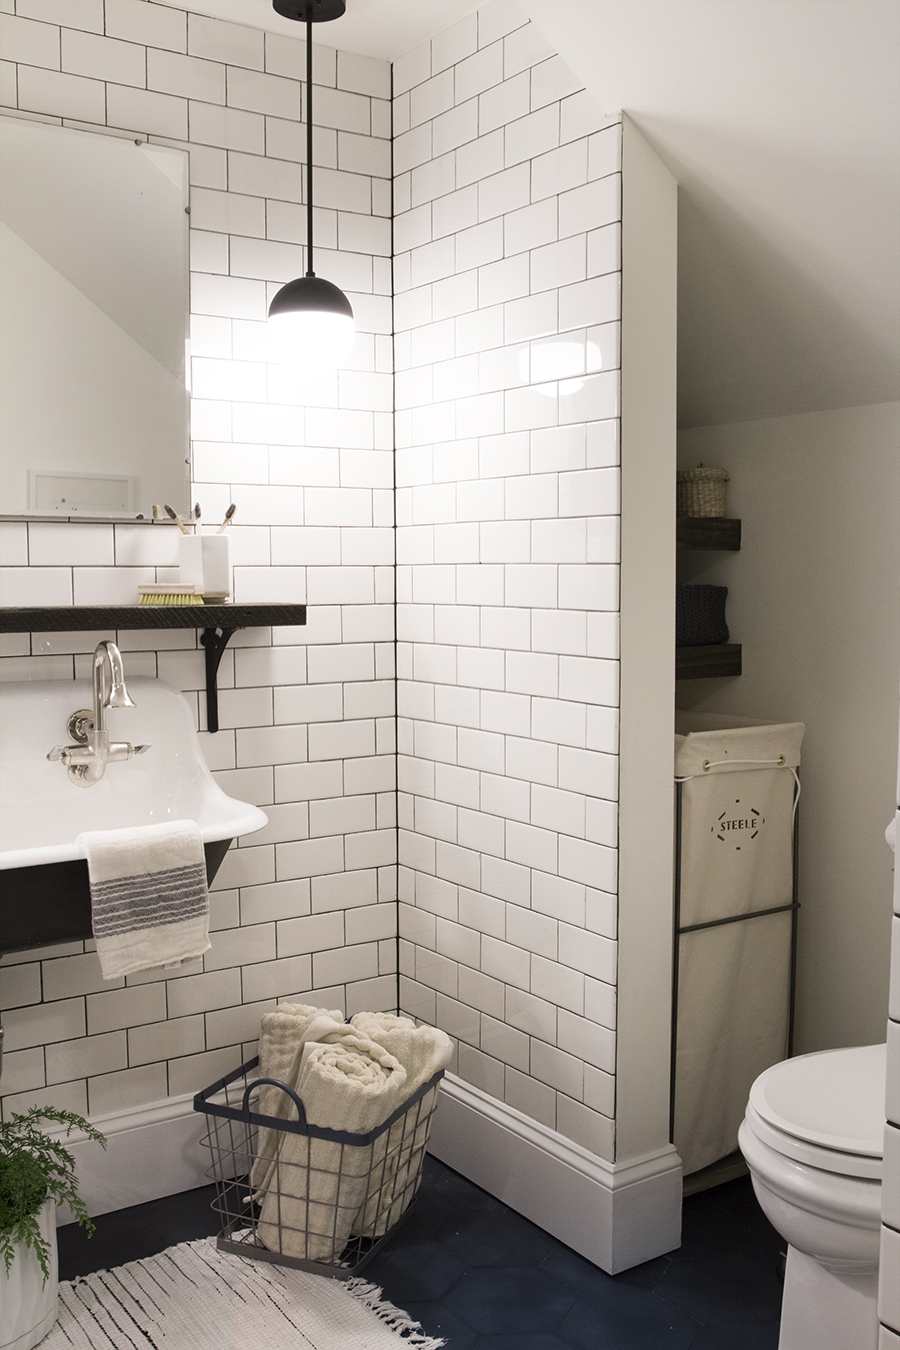 Try This : Add a Corner Shelf to your Shower - Deuce Cities Henhouse